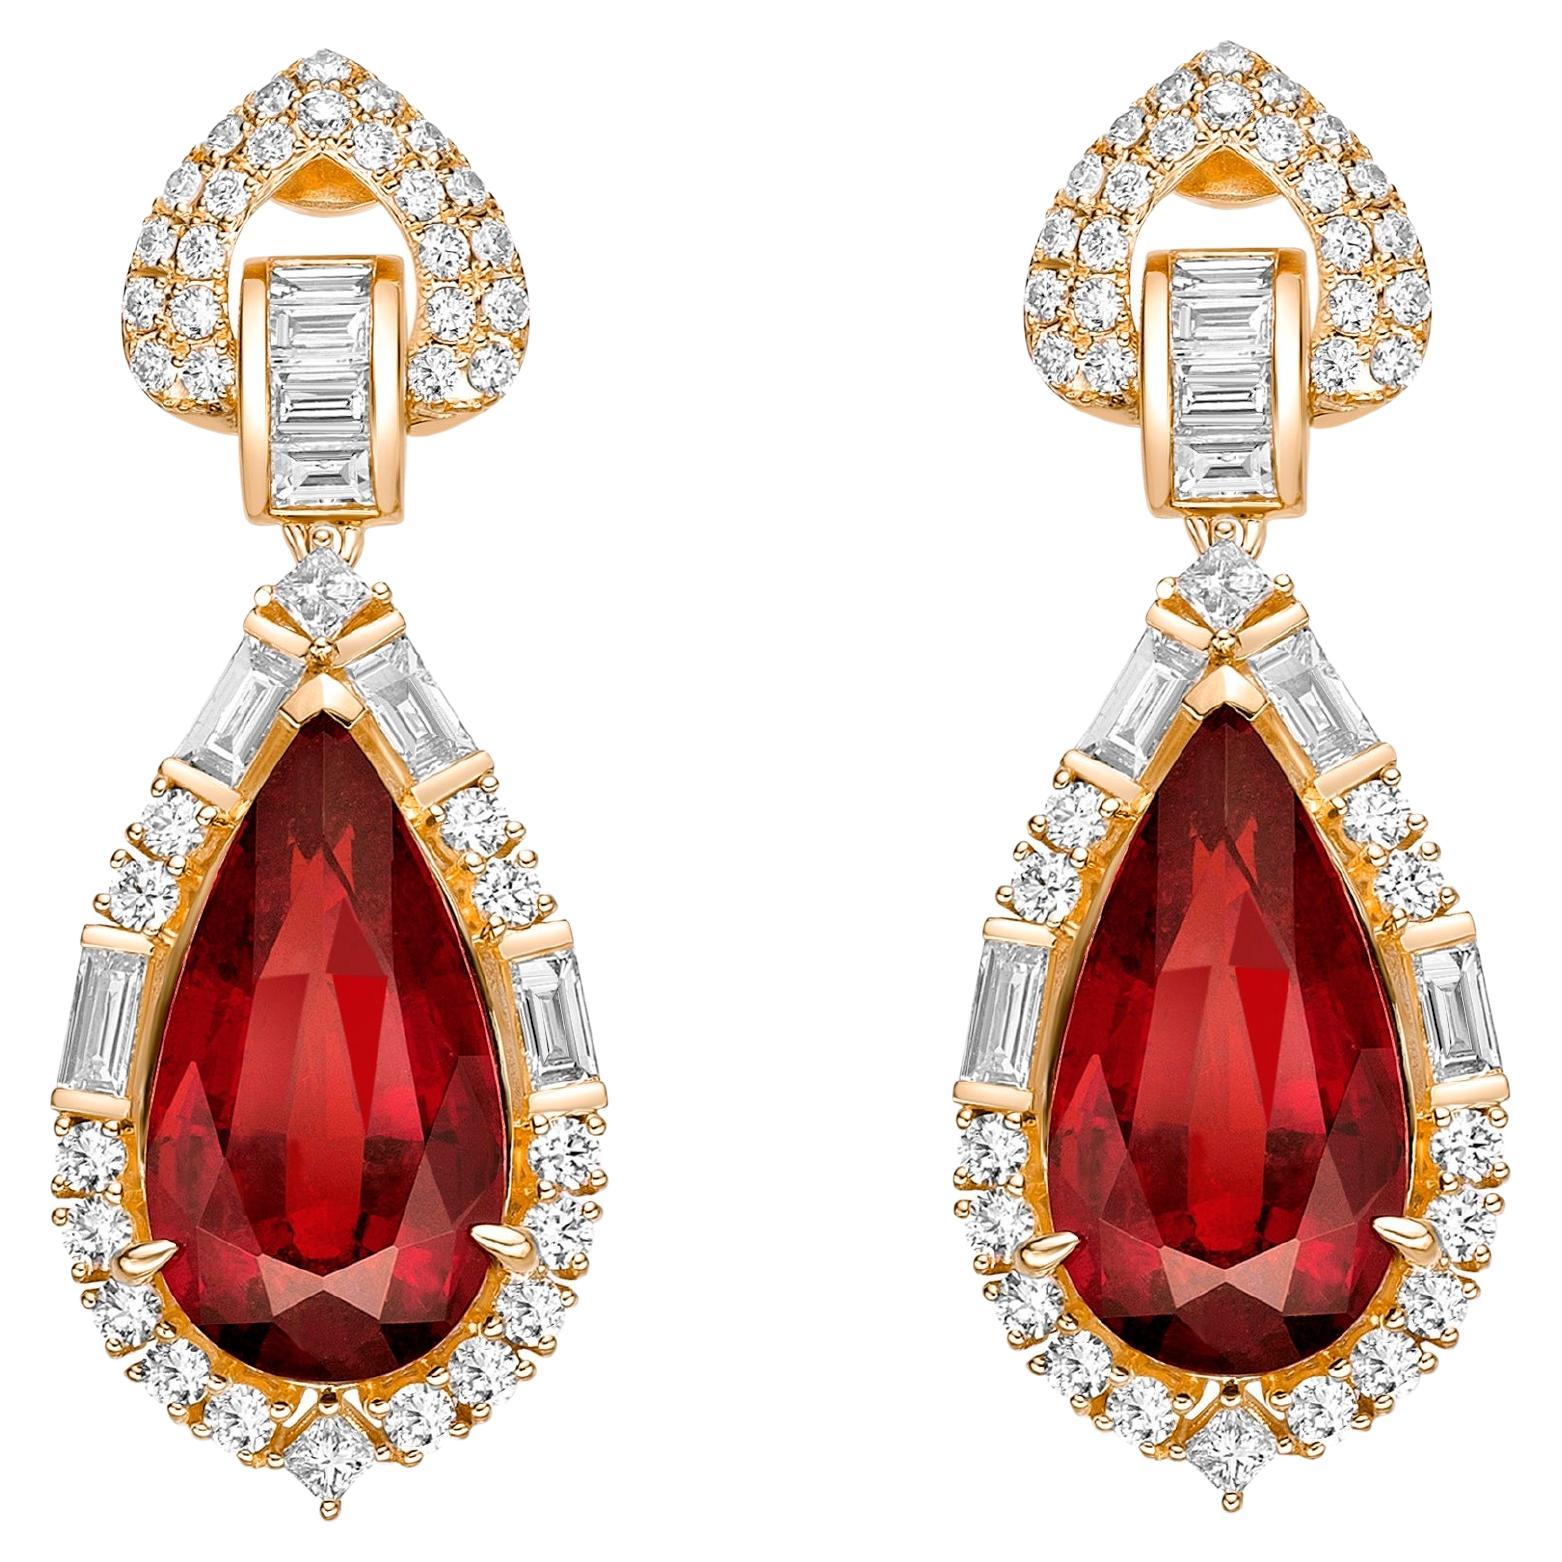 16.480 Carat Rubellite Drop Earrings in 18Karat Yellow Gold with White Diamond. For Sale